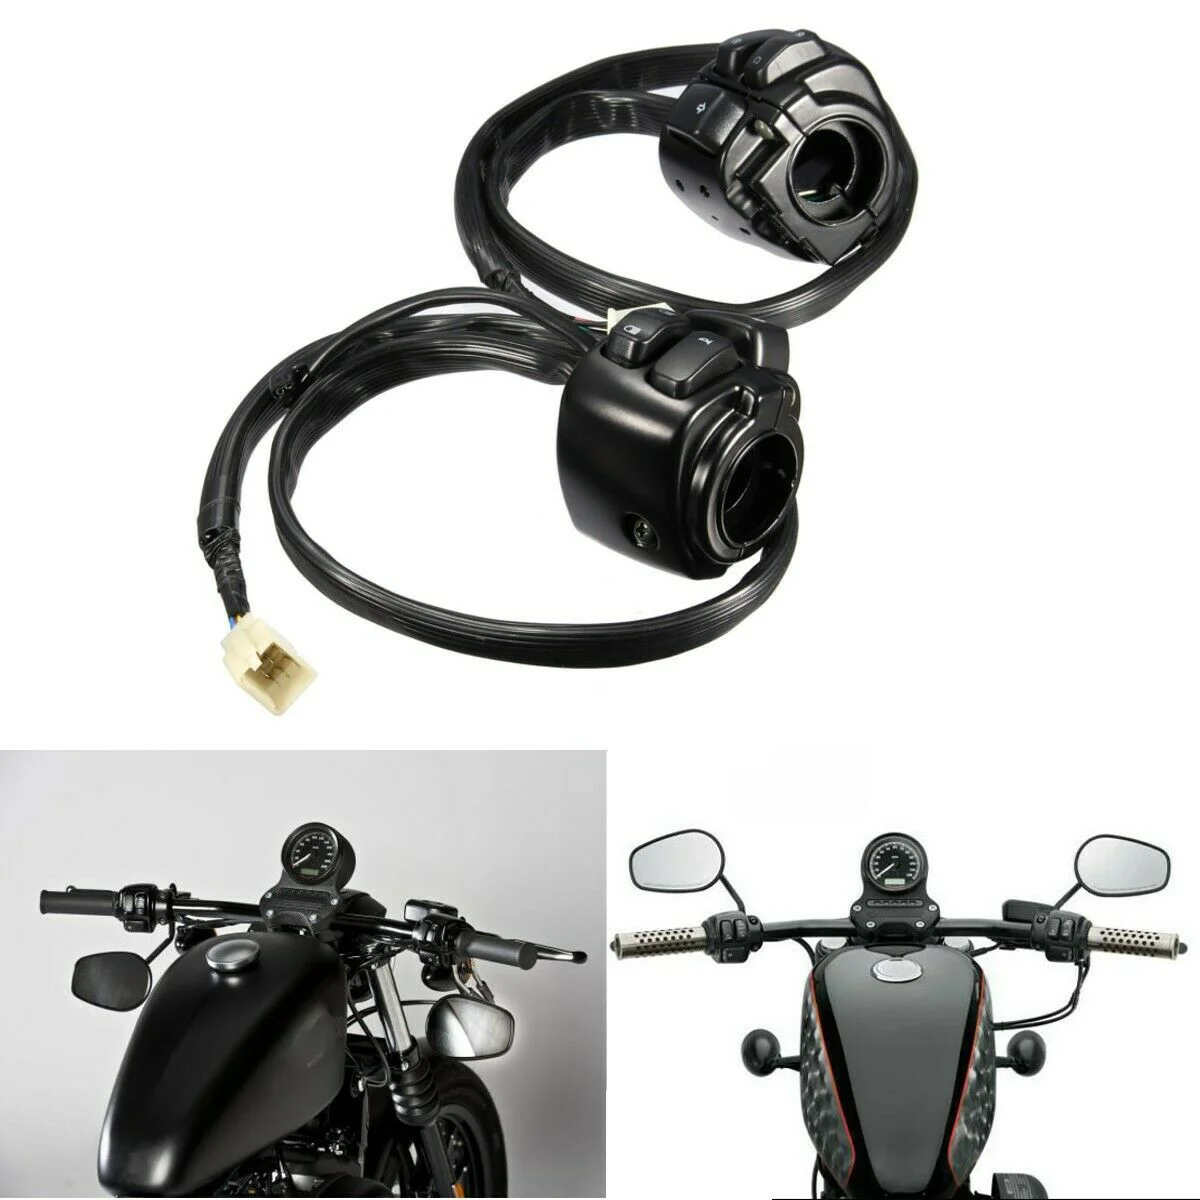 Pair Motorcycle 1" 25mm Handlebar Control Switch Turn Signal Horn For Harley Dyna Softail Sportster 883 1200 1996-2012